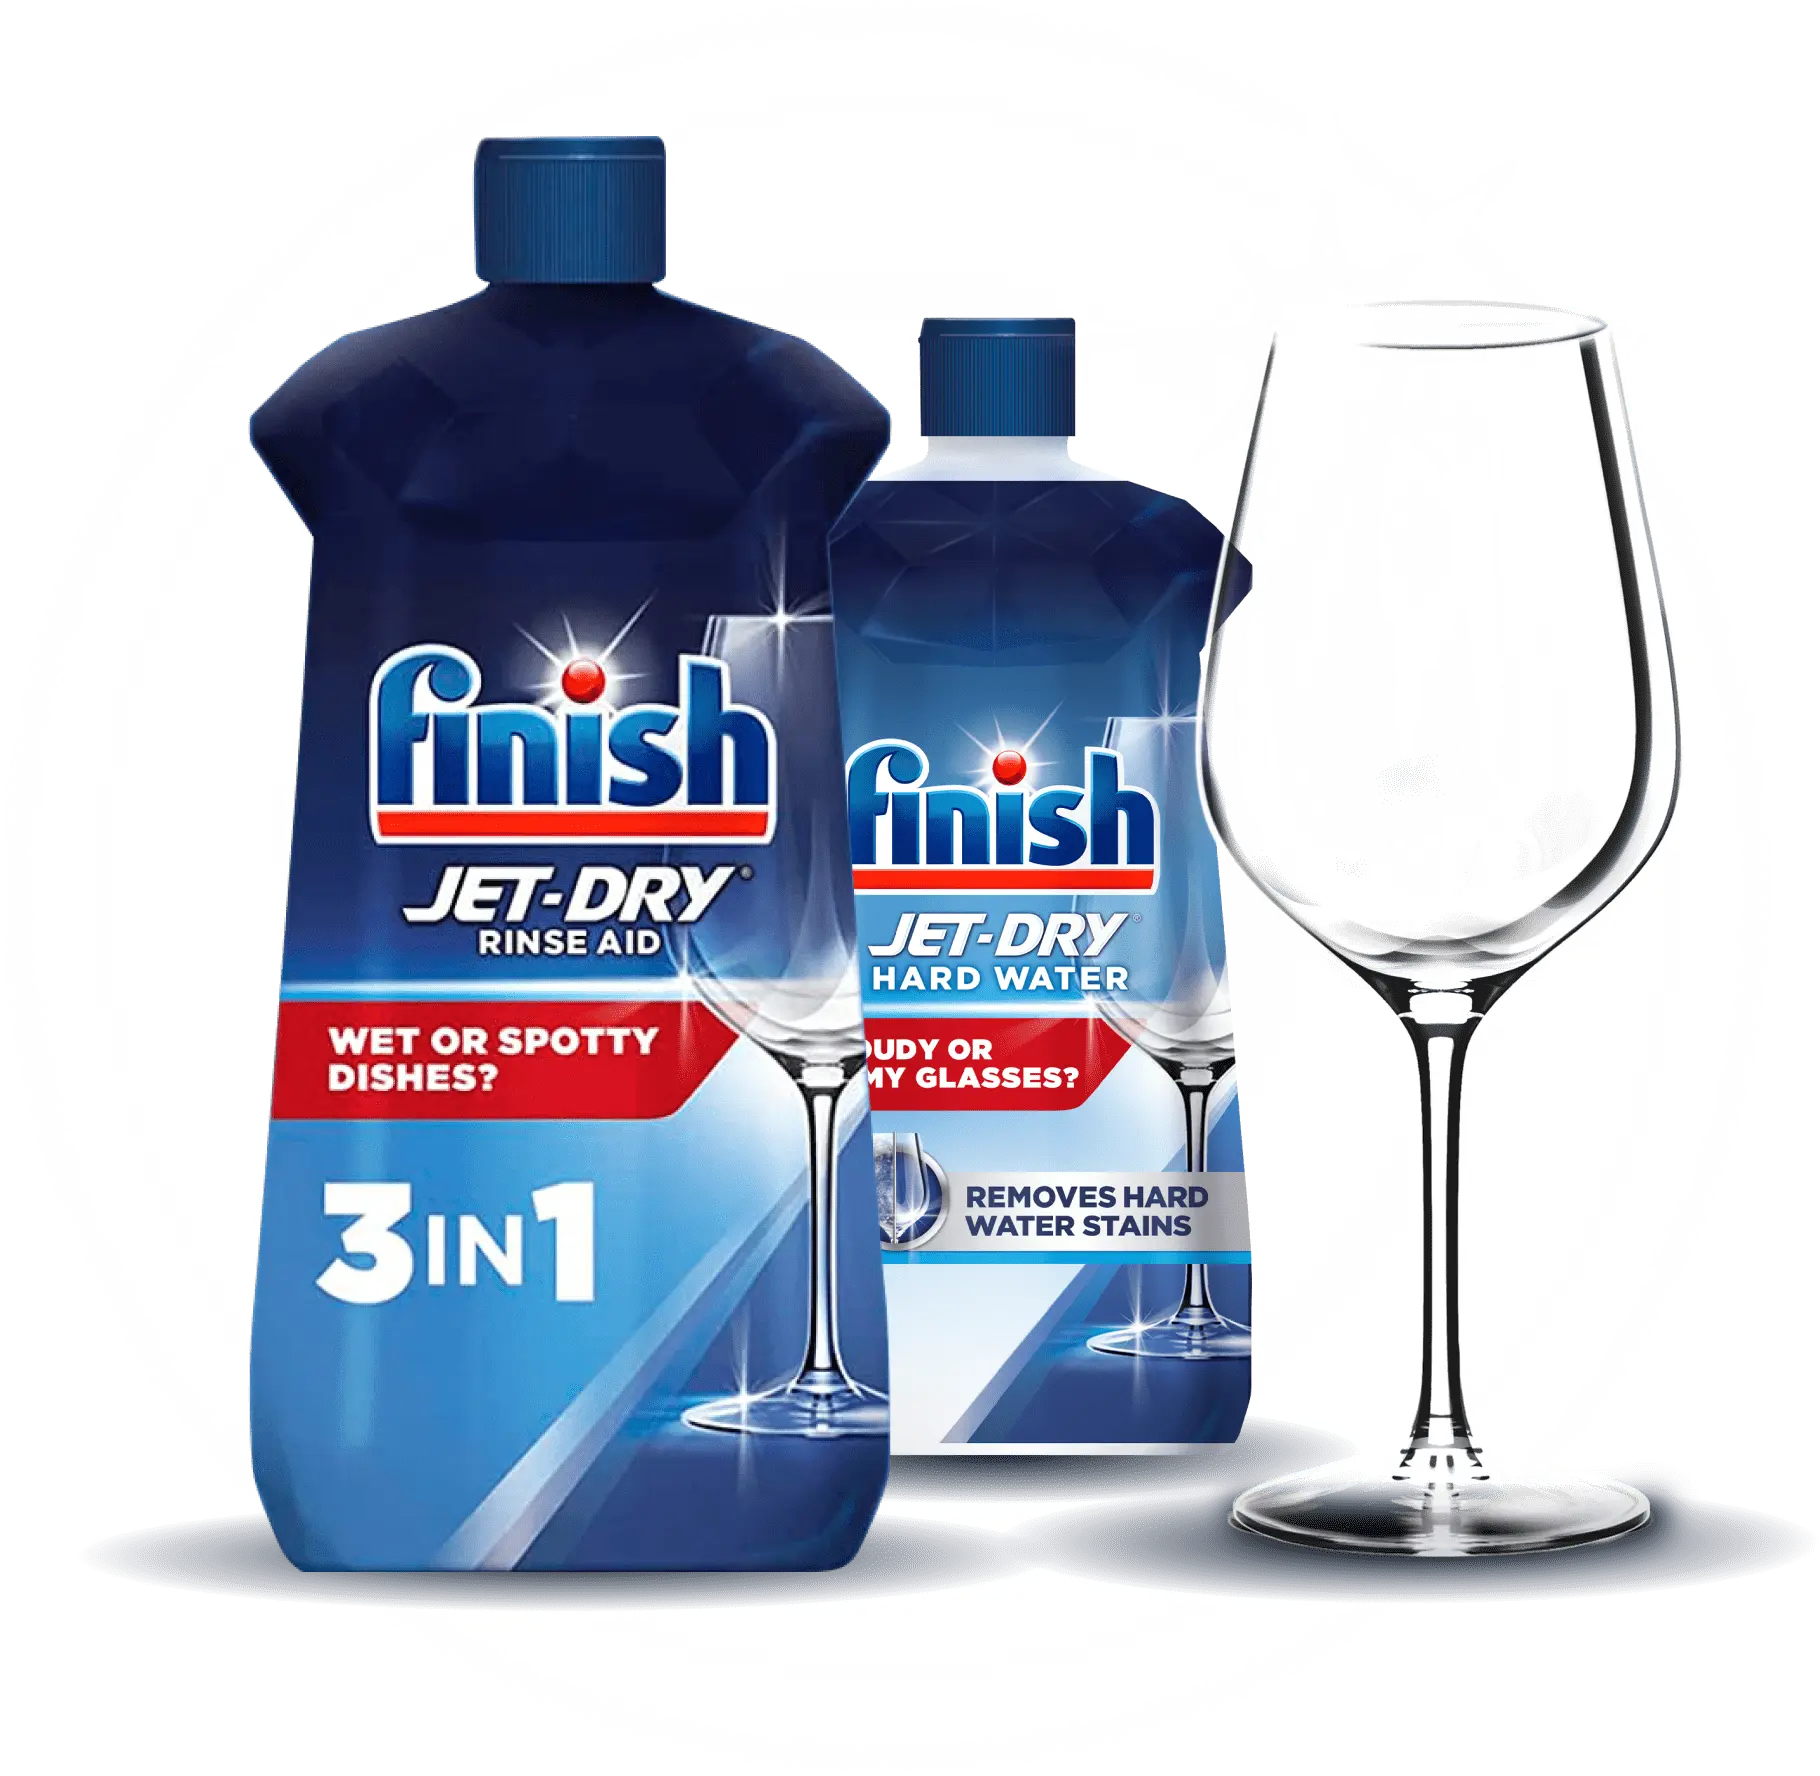 Finish Jet-Dry 3in1 is a rinse aid that solves three problems at once - it  rinses, dries, and shines what detergent alone can't! #finish…